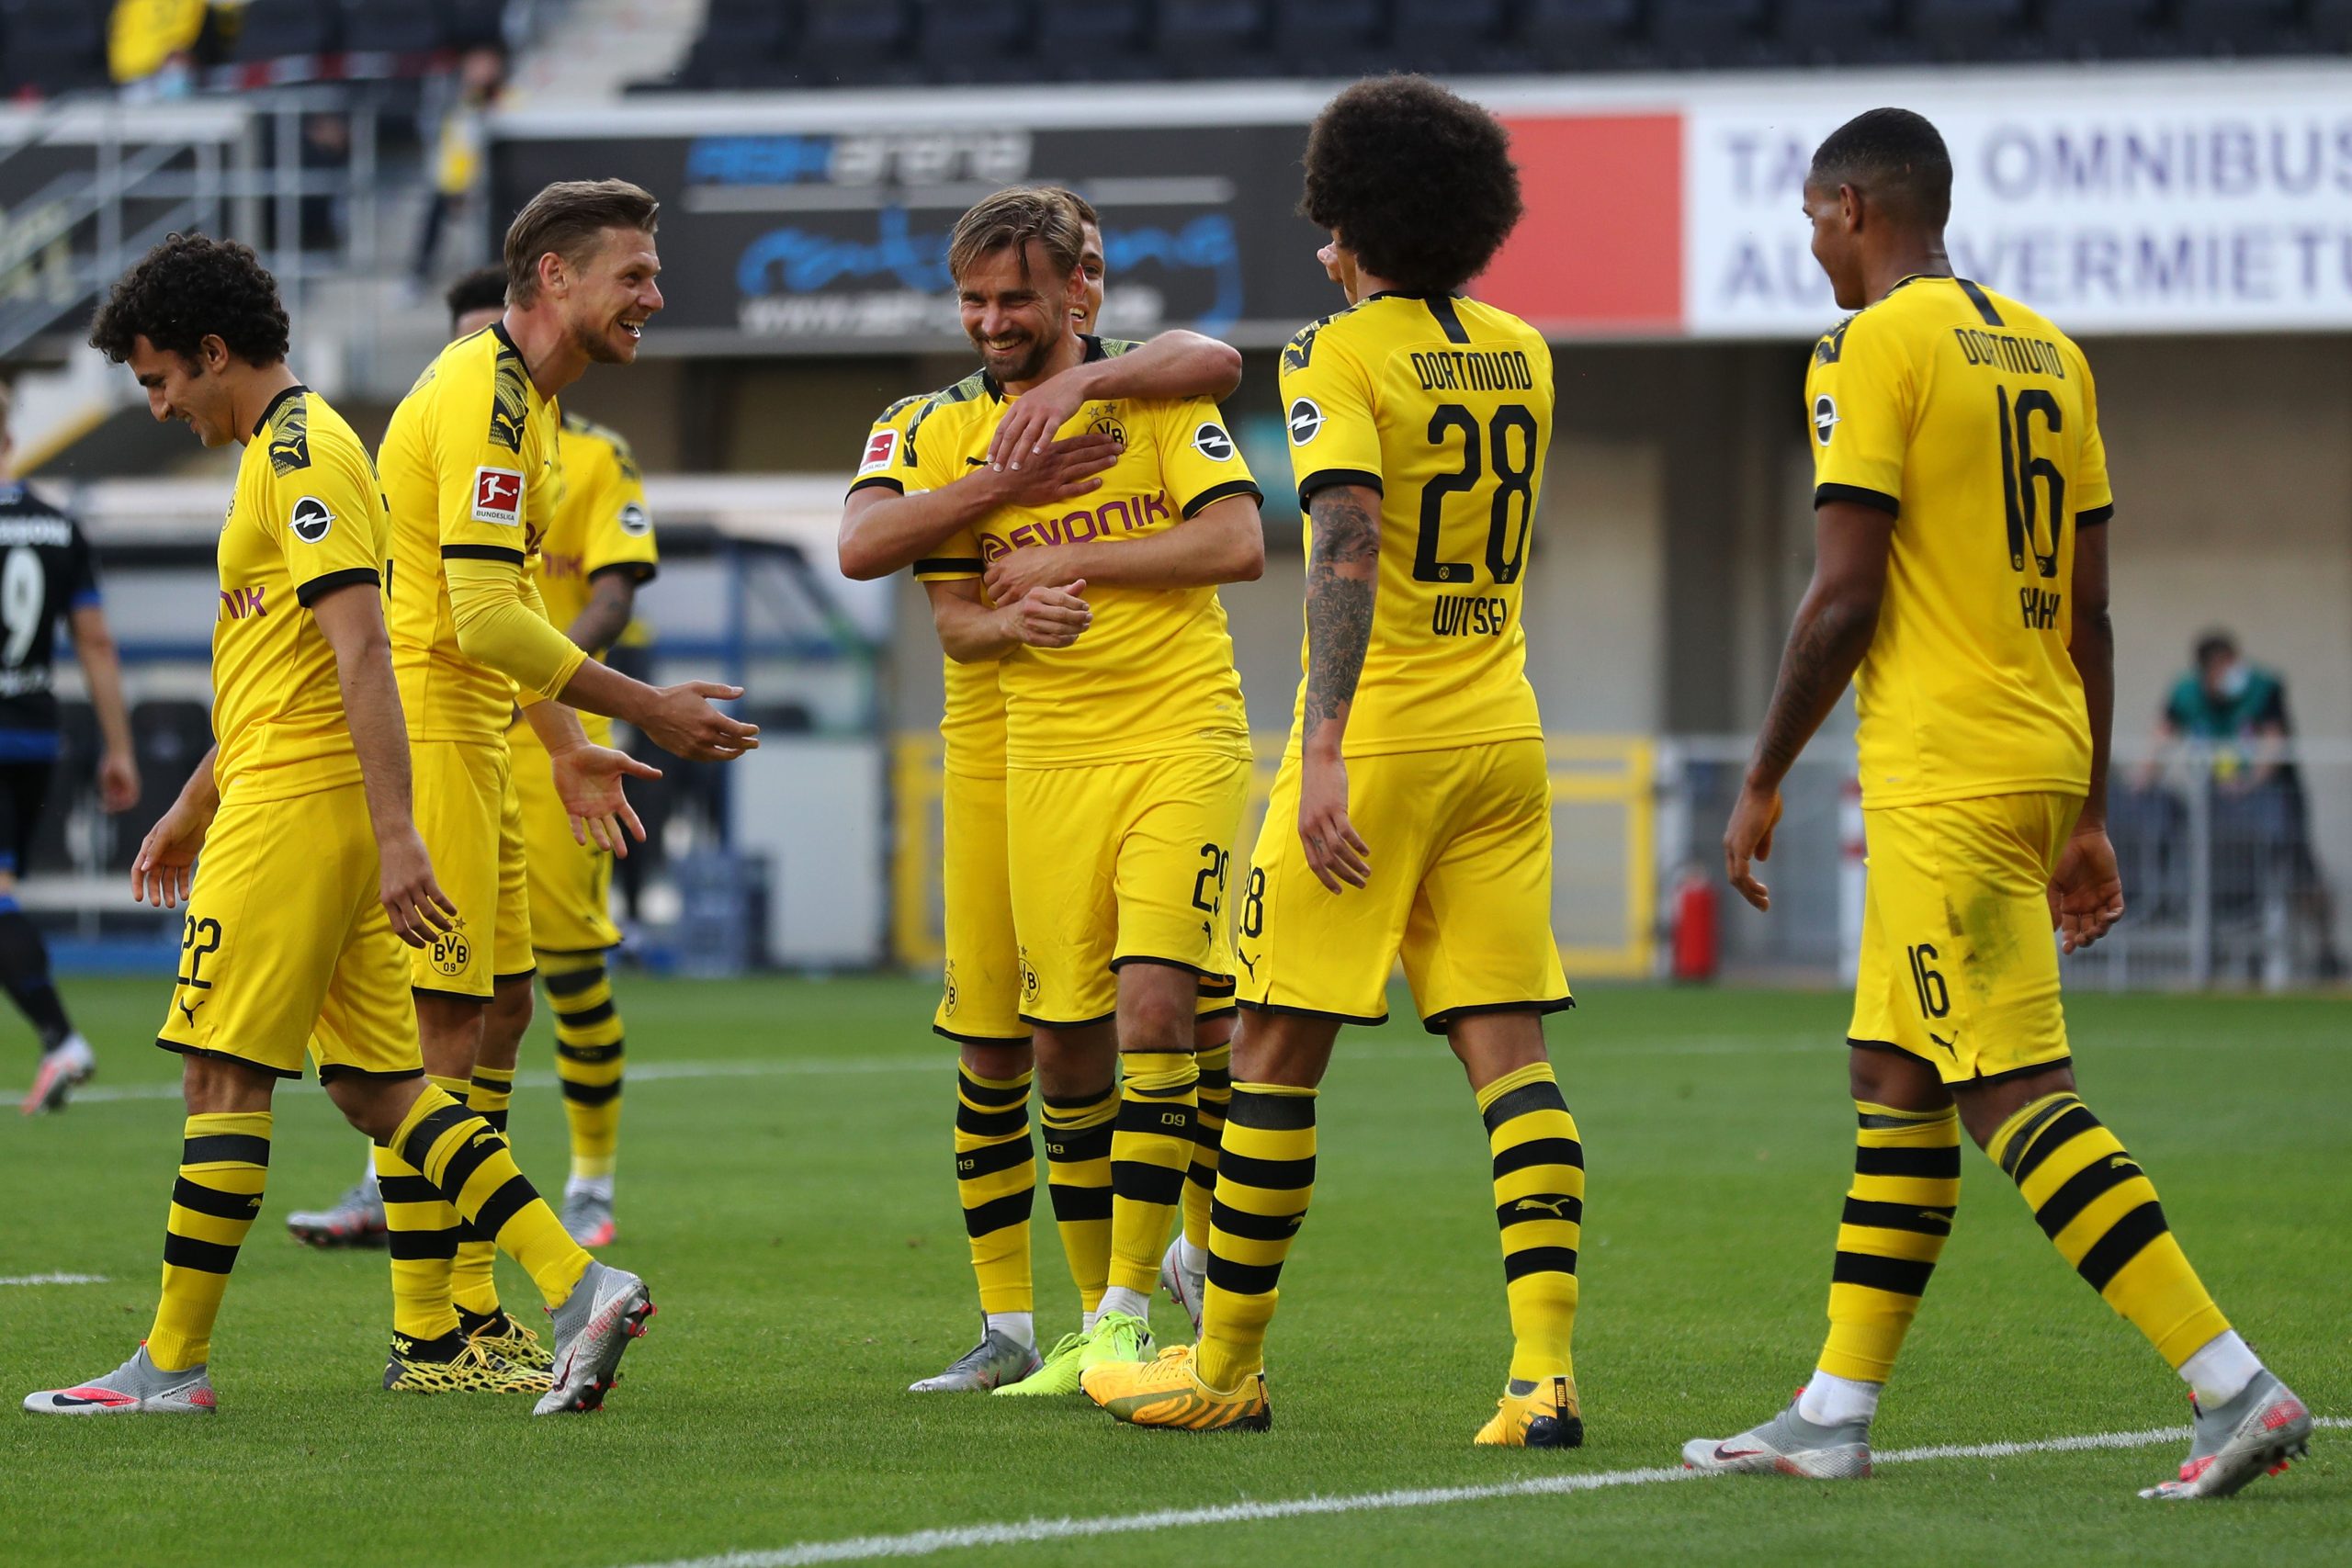 Borussia Dortmund player ratings vs Paderborn - A memorable outing for Schmelzer